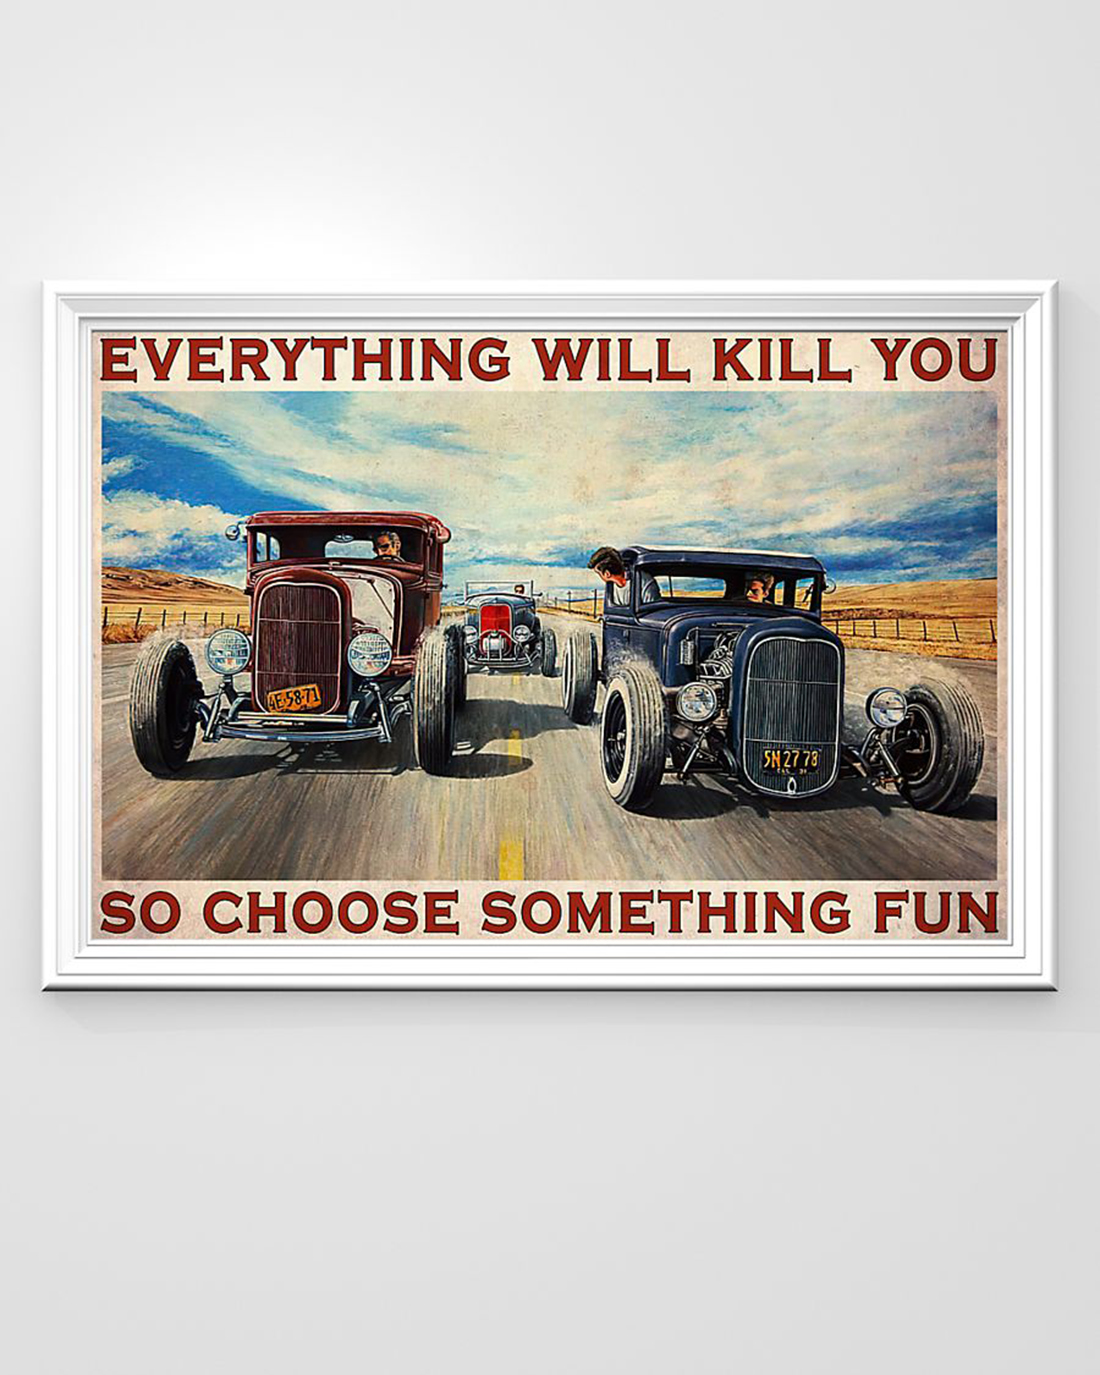 Hot rod everything will kill you so choose something fun poster